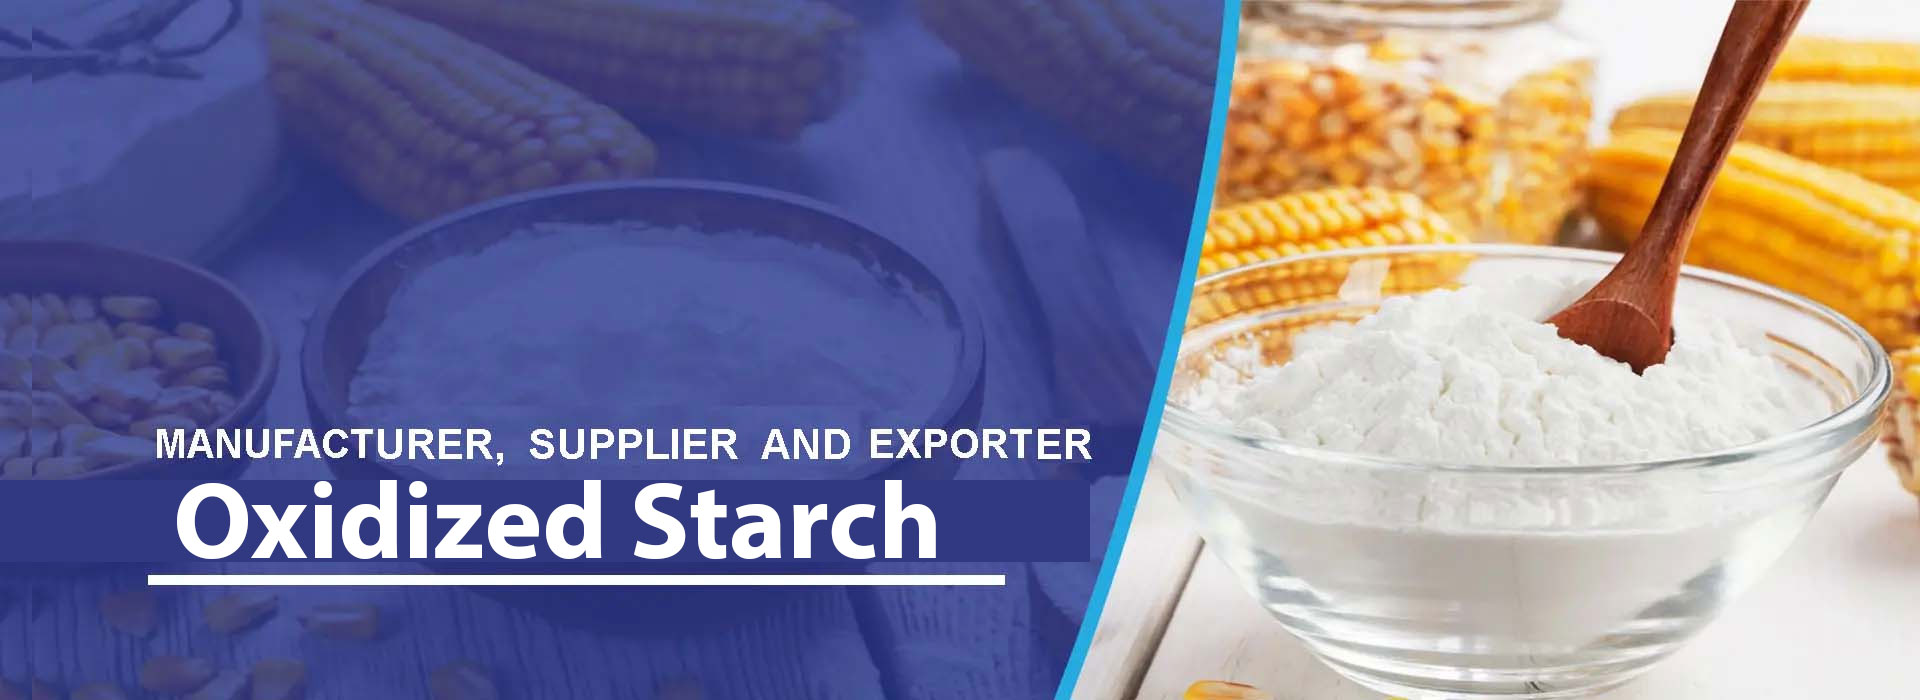 Manufacturer of Oxidized Starch